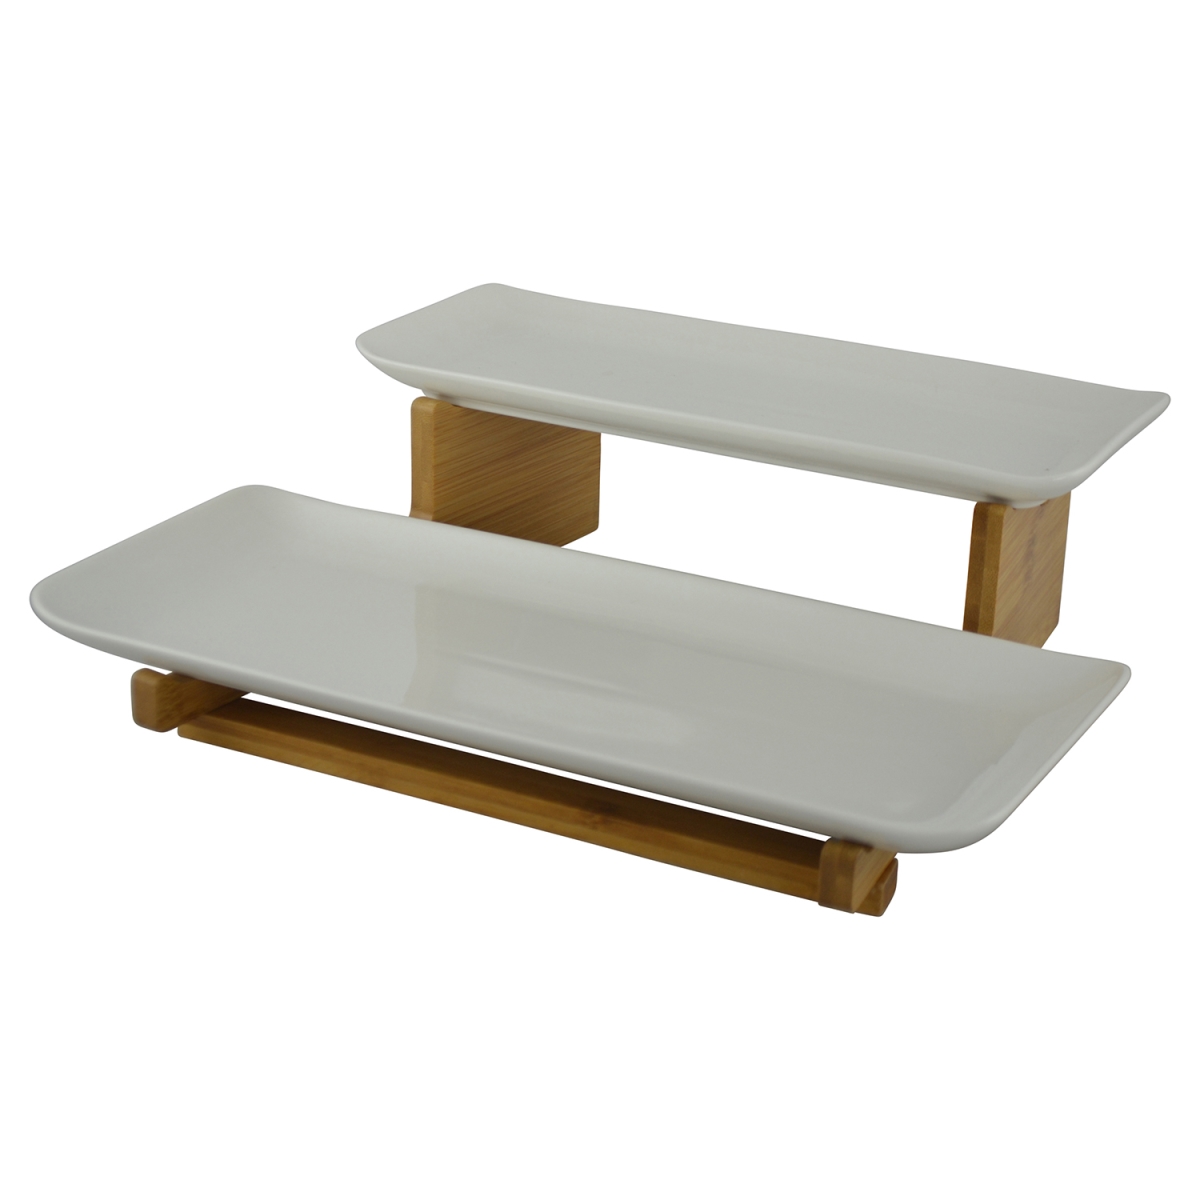 Picture of Three Star KW267 13 x 11 x 4 in. 2-Level Rectangular Platters